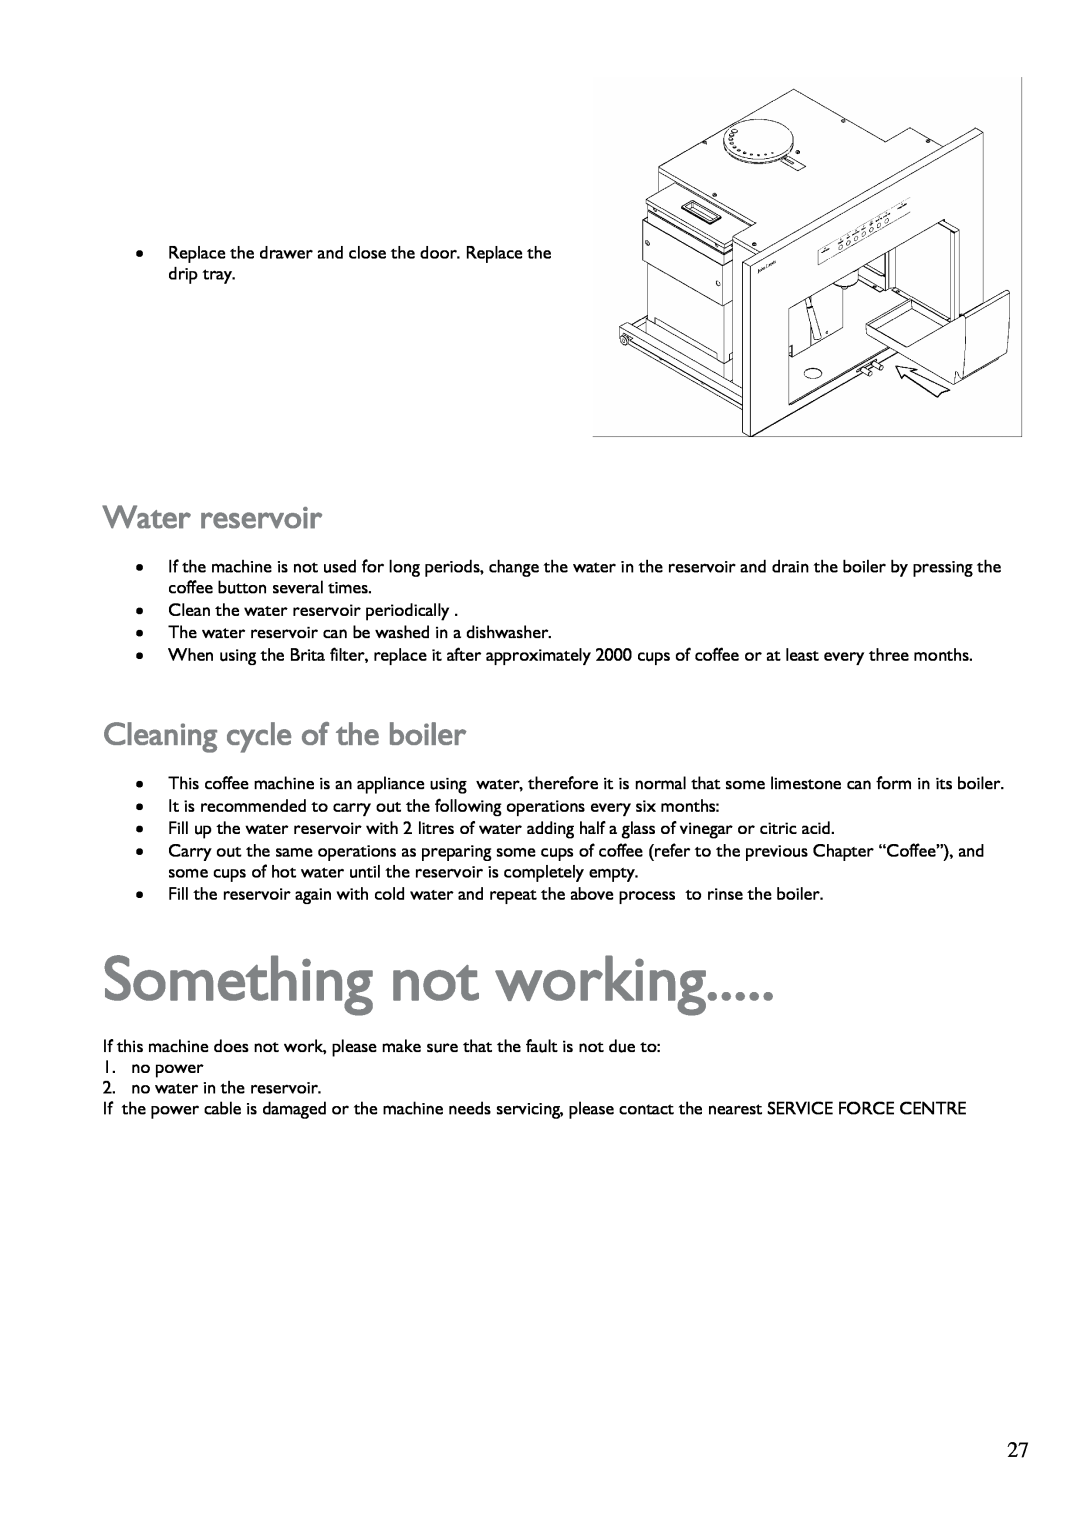 John Lewis JLBICM 01 instruction manual Something not working, Water reservoir, Cleaning cycle of the boiler 